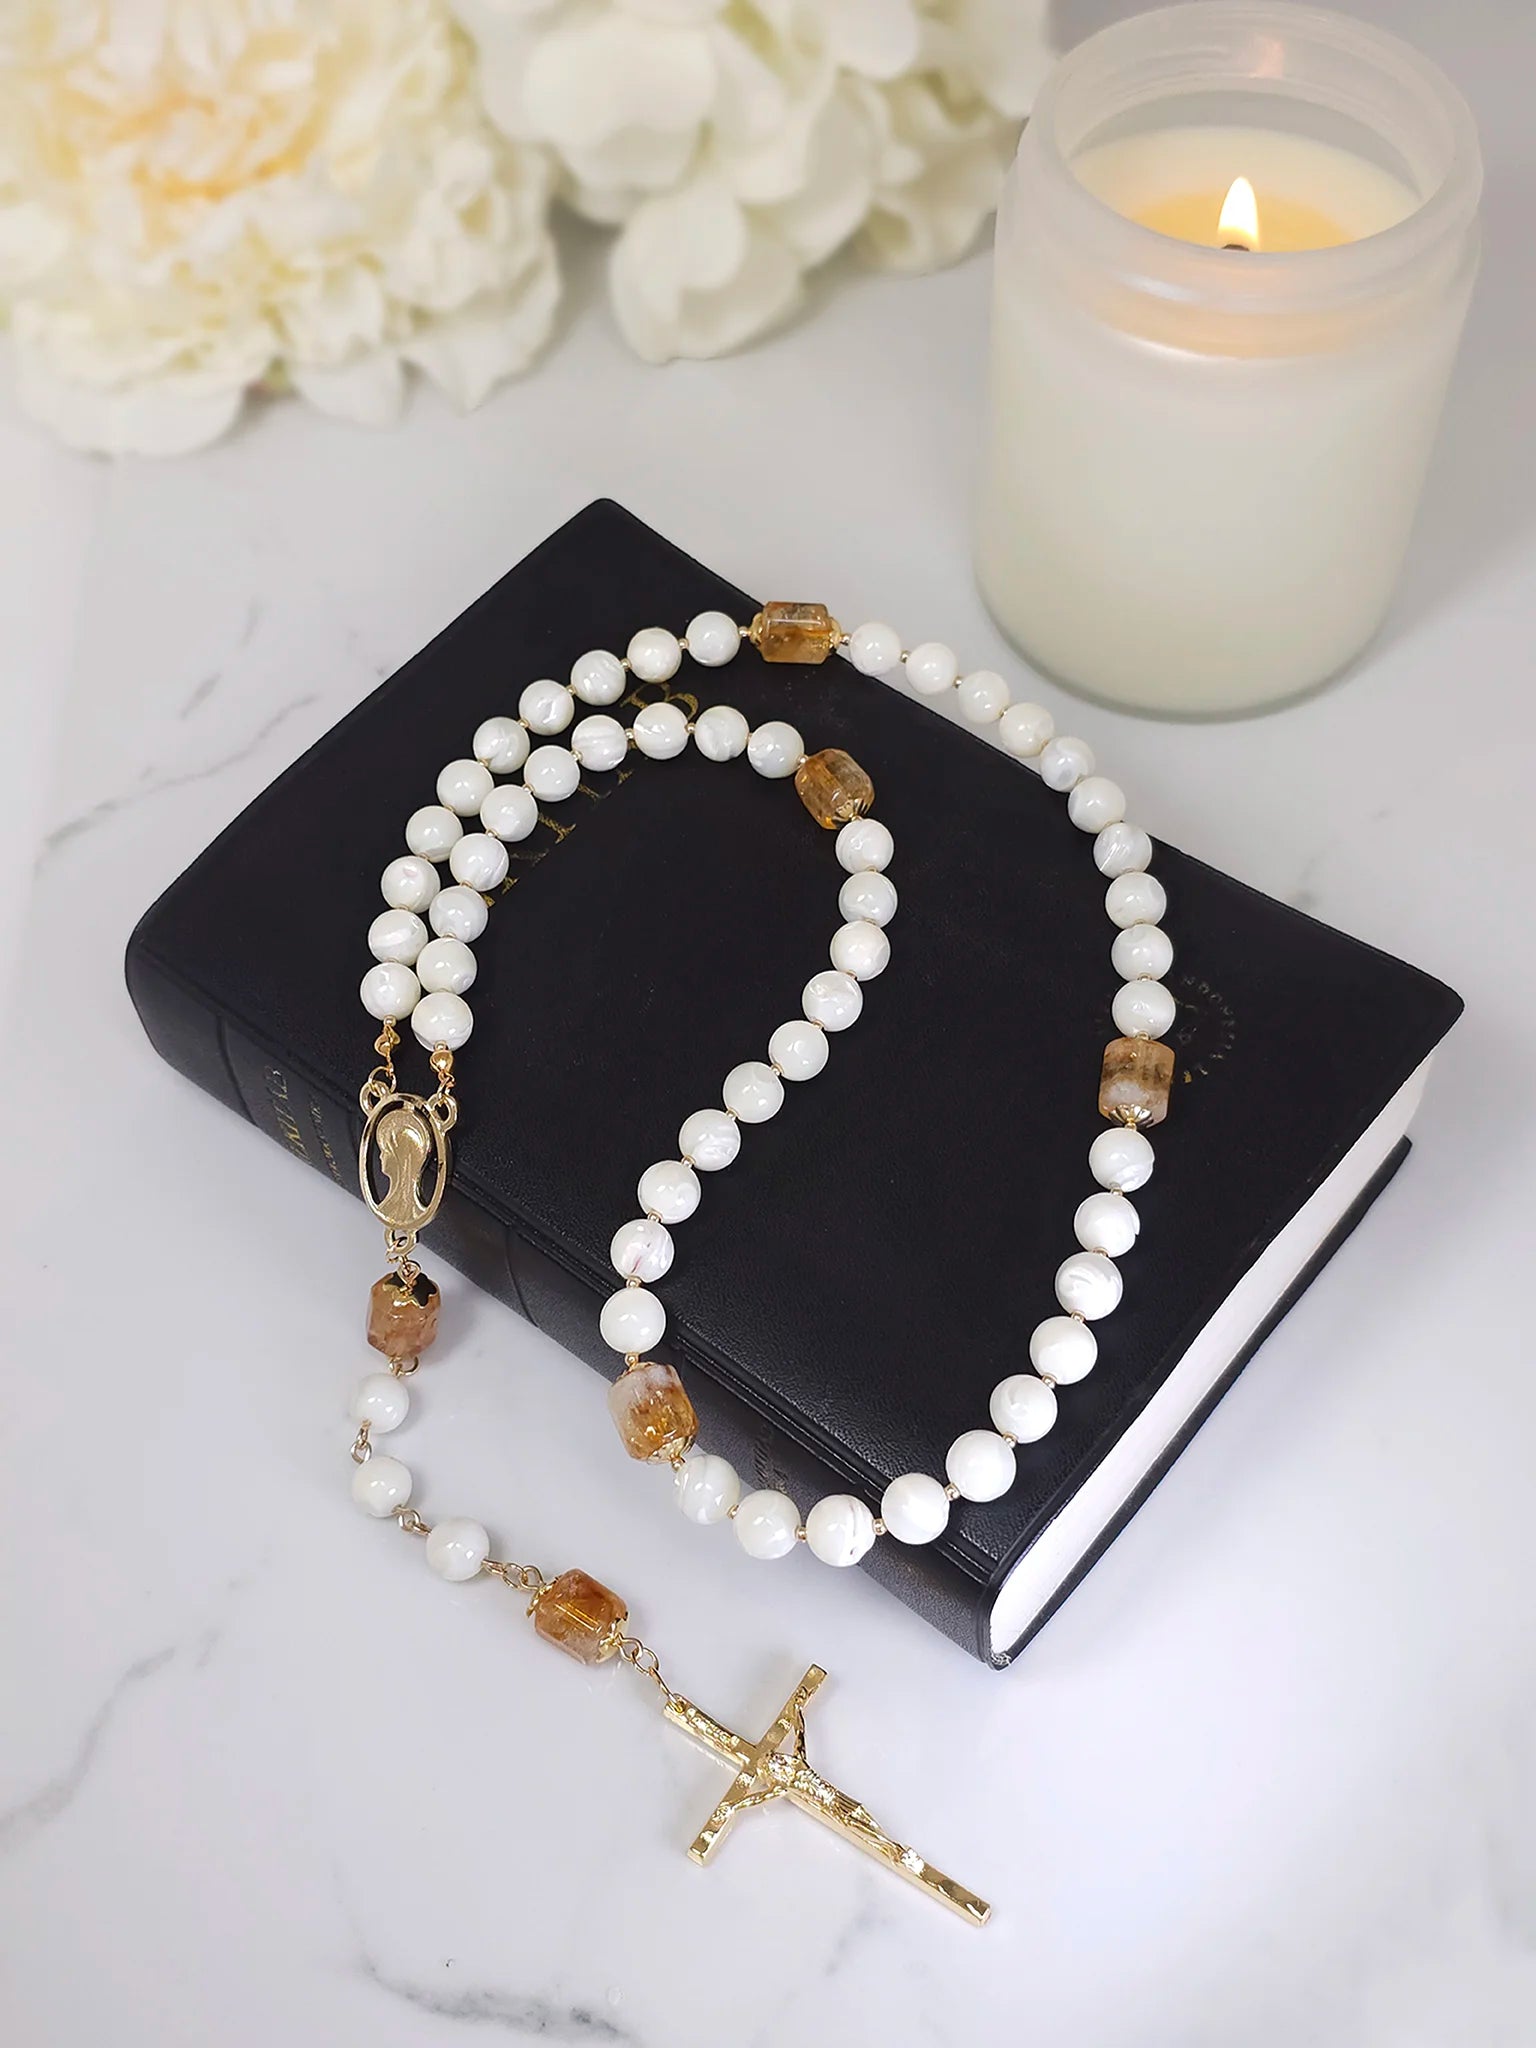 Handcrafted rosary of White Mother of Pearl and Citrine beads, with gold-filled caps, arranged on a white table.